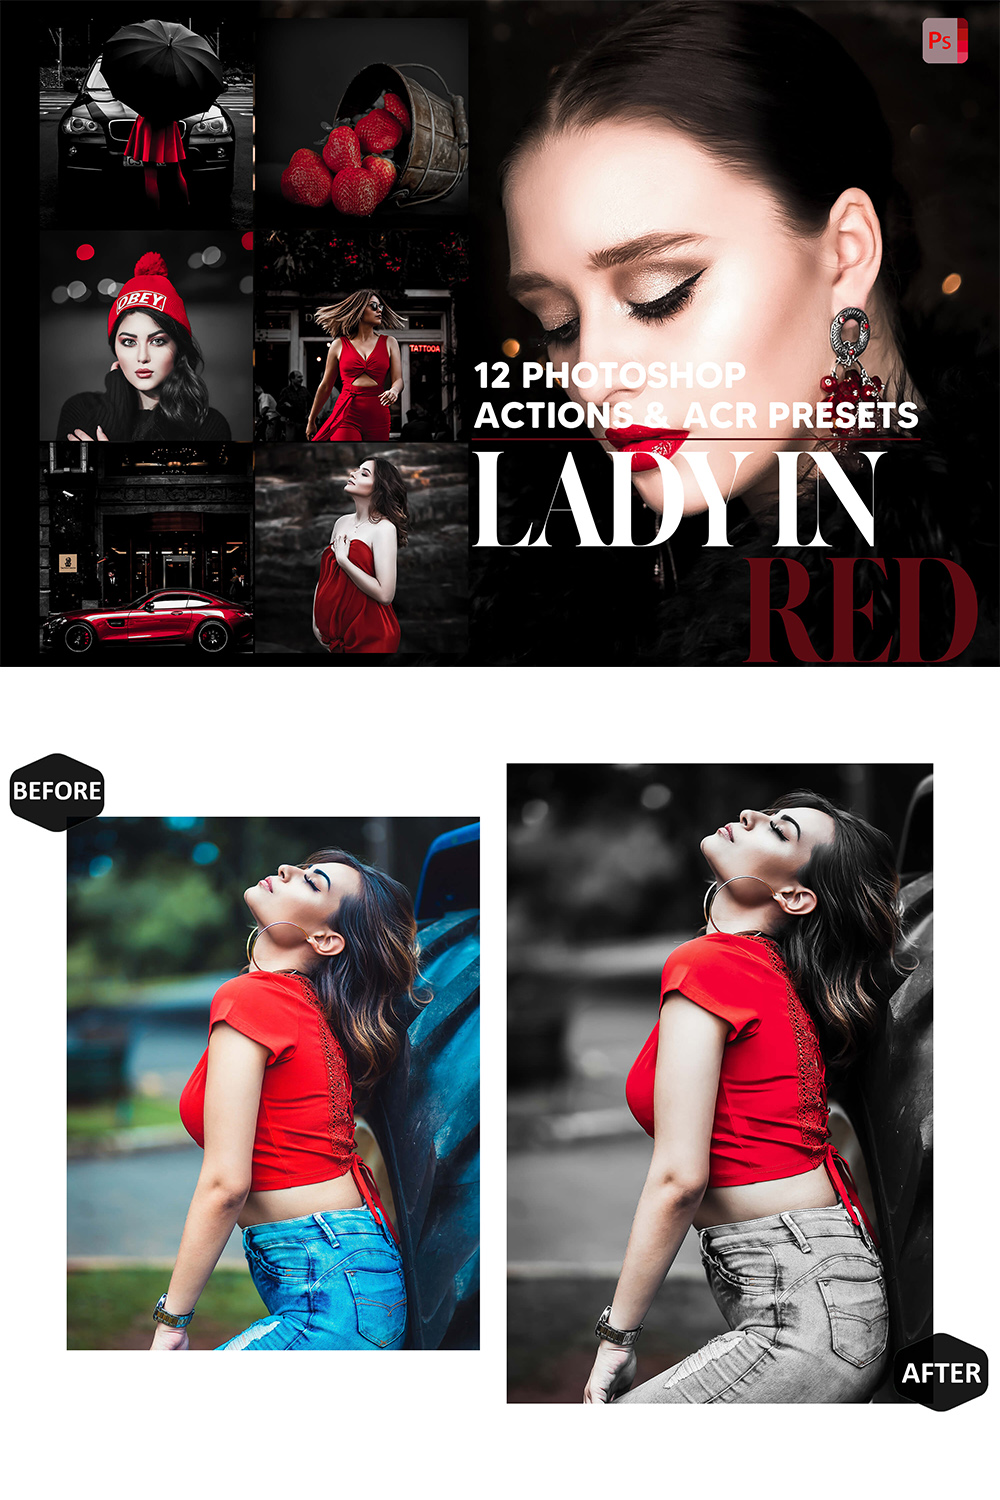 12 Photoshop Actions, Lady In Red Ps Action, Monochrome ACR Preset, Focus Ps Filter, Atn Portrait And Lifestyle Theme For Instagram, Blogger pinterest preview image.